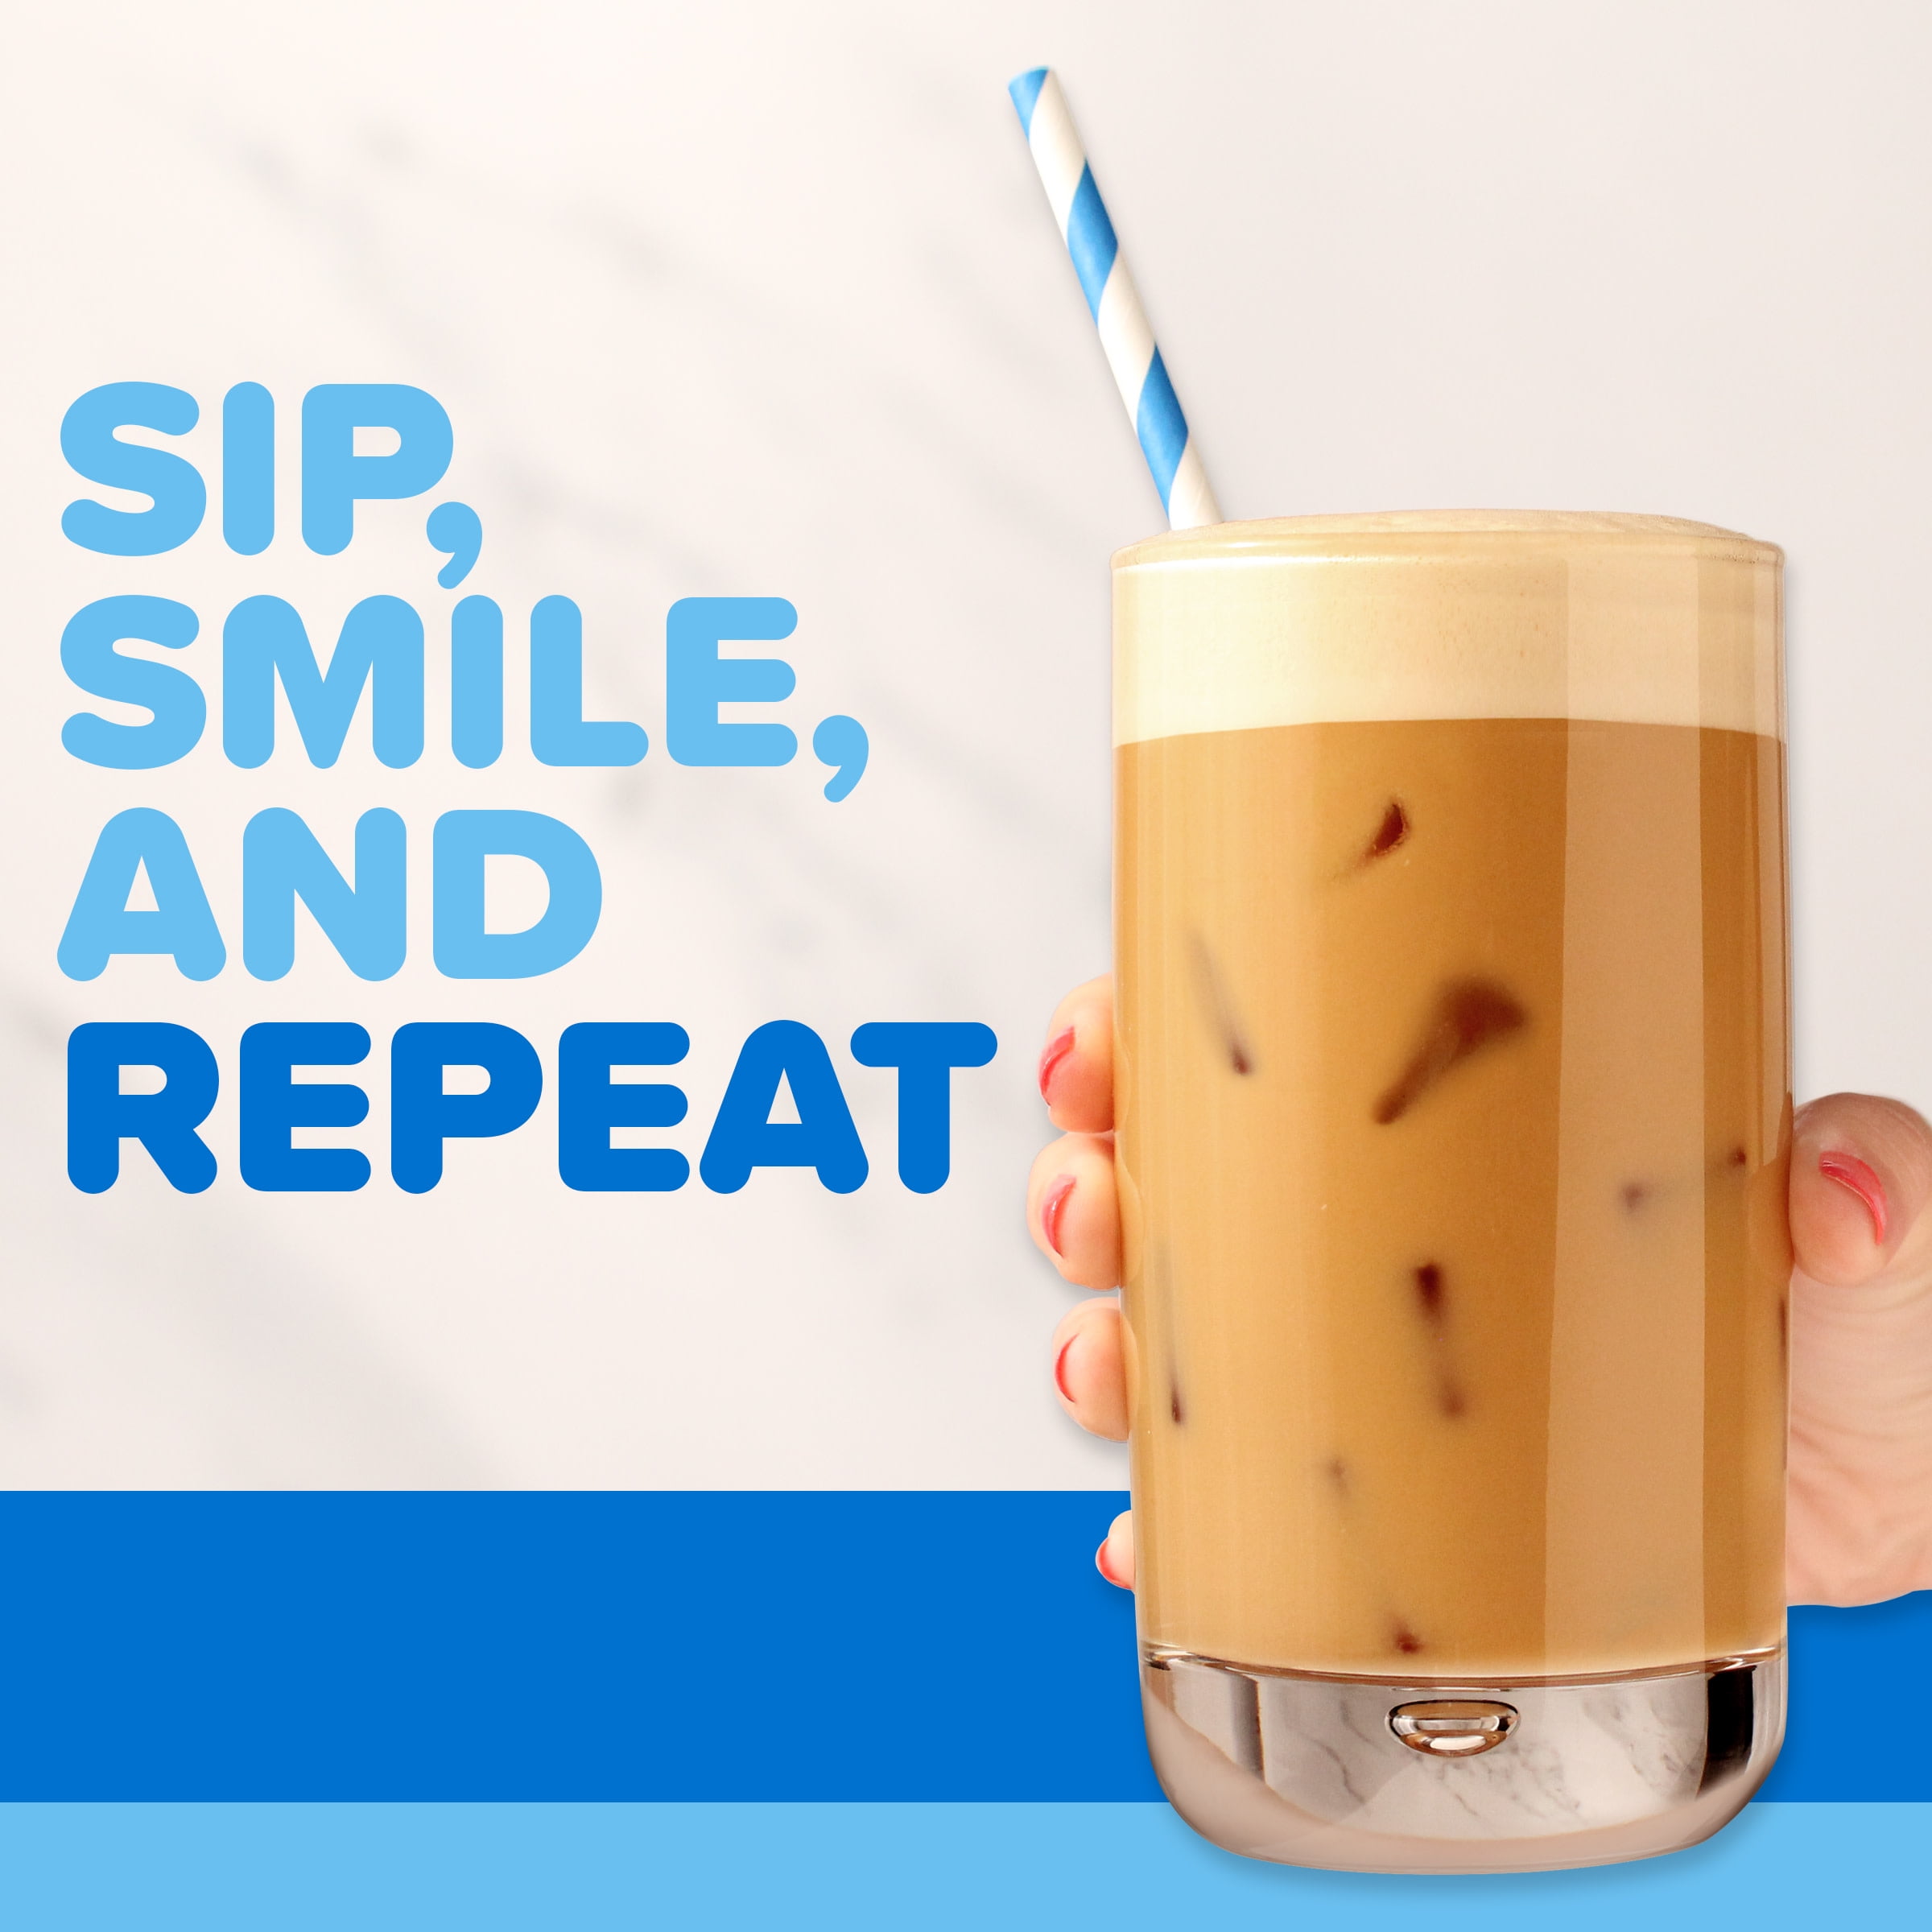 IHOP Pumpkin Spice Iced Latte with Cold Foam Instant Coffee Beverage Mix,  5.82 oz, 6 Packets